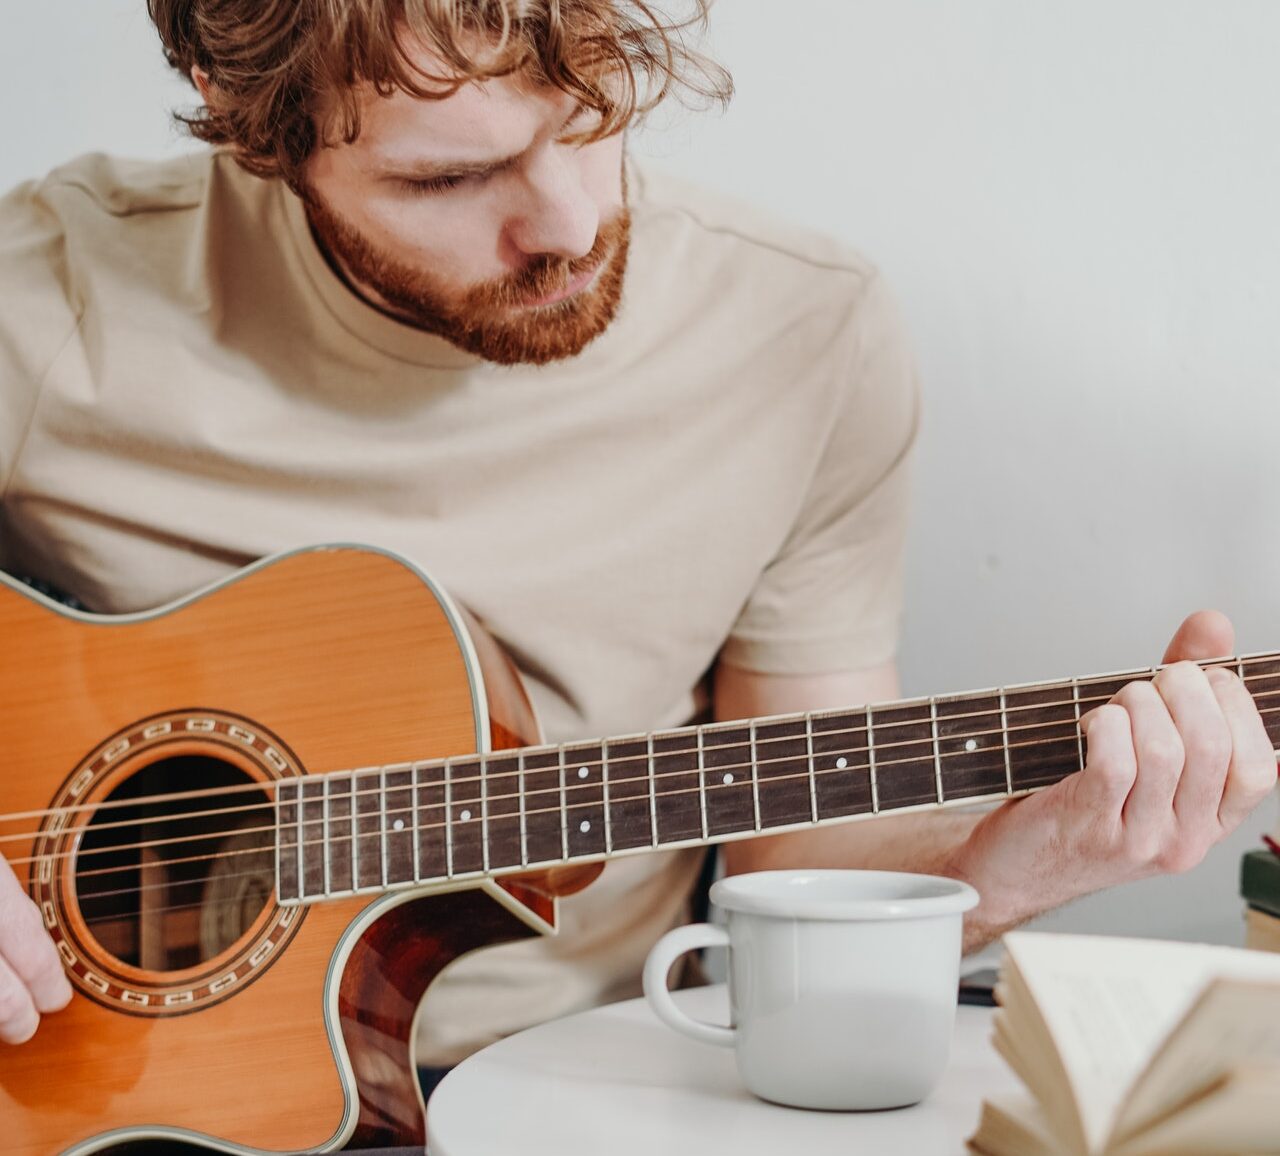 Man learning to change chords faster on guitar